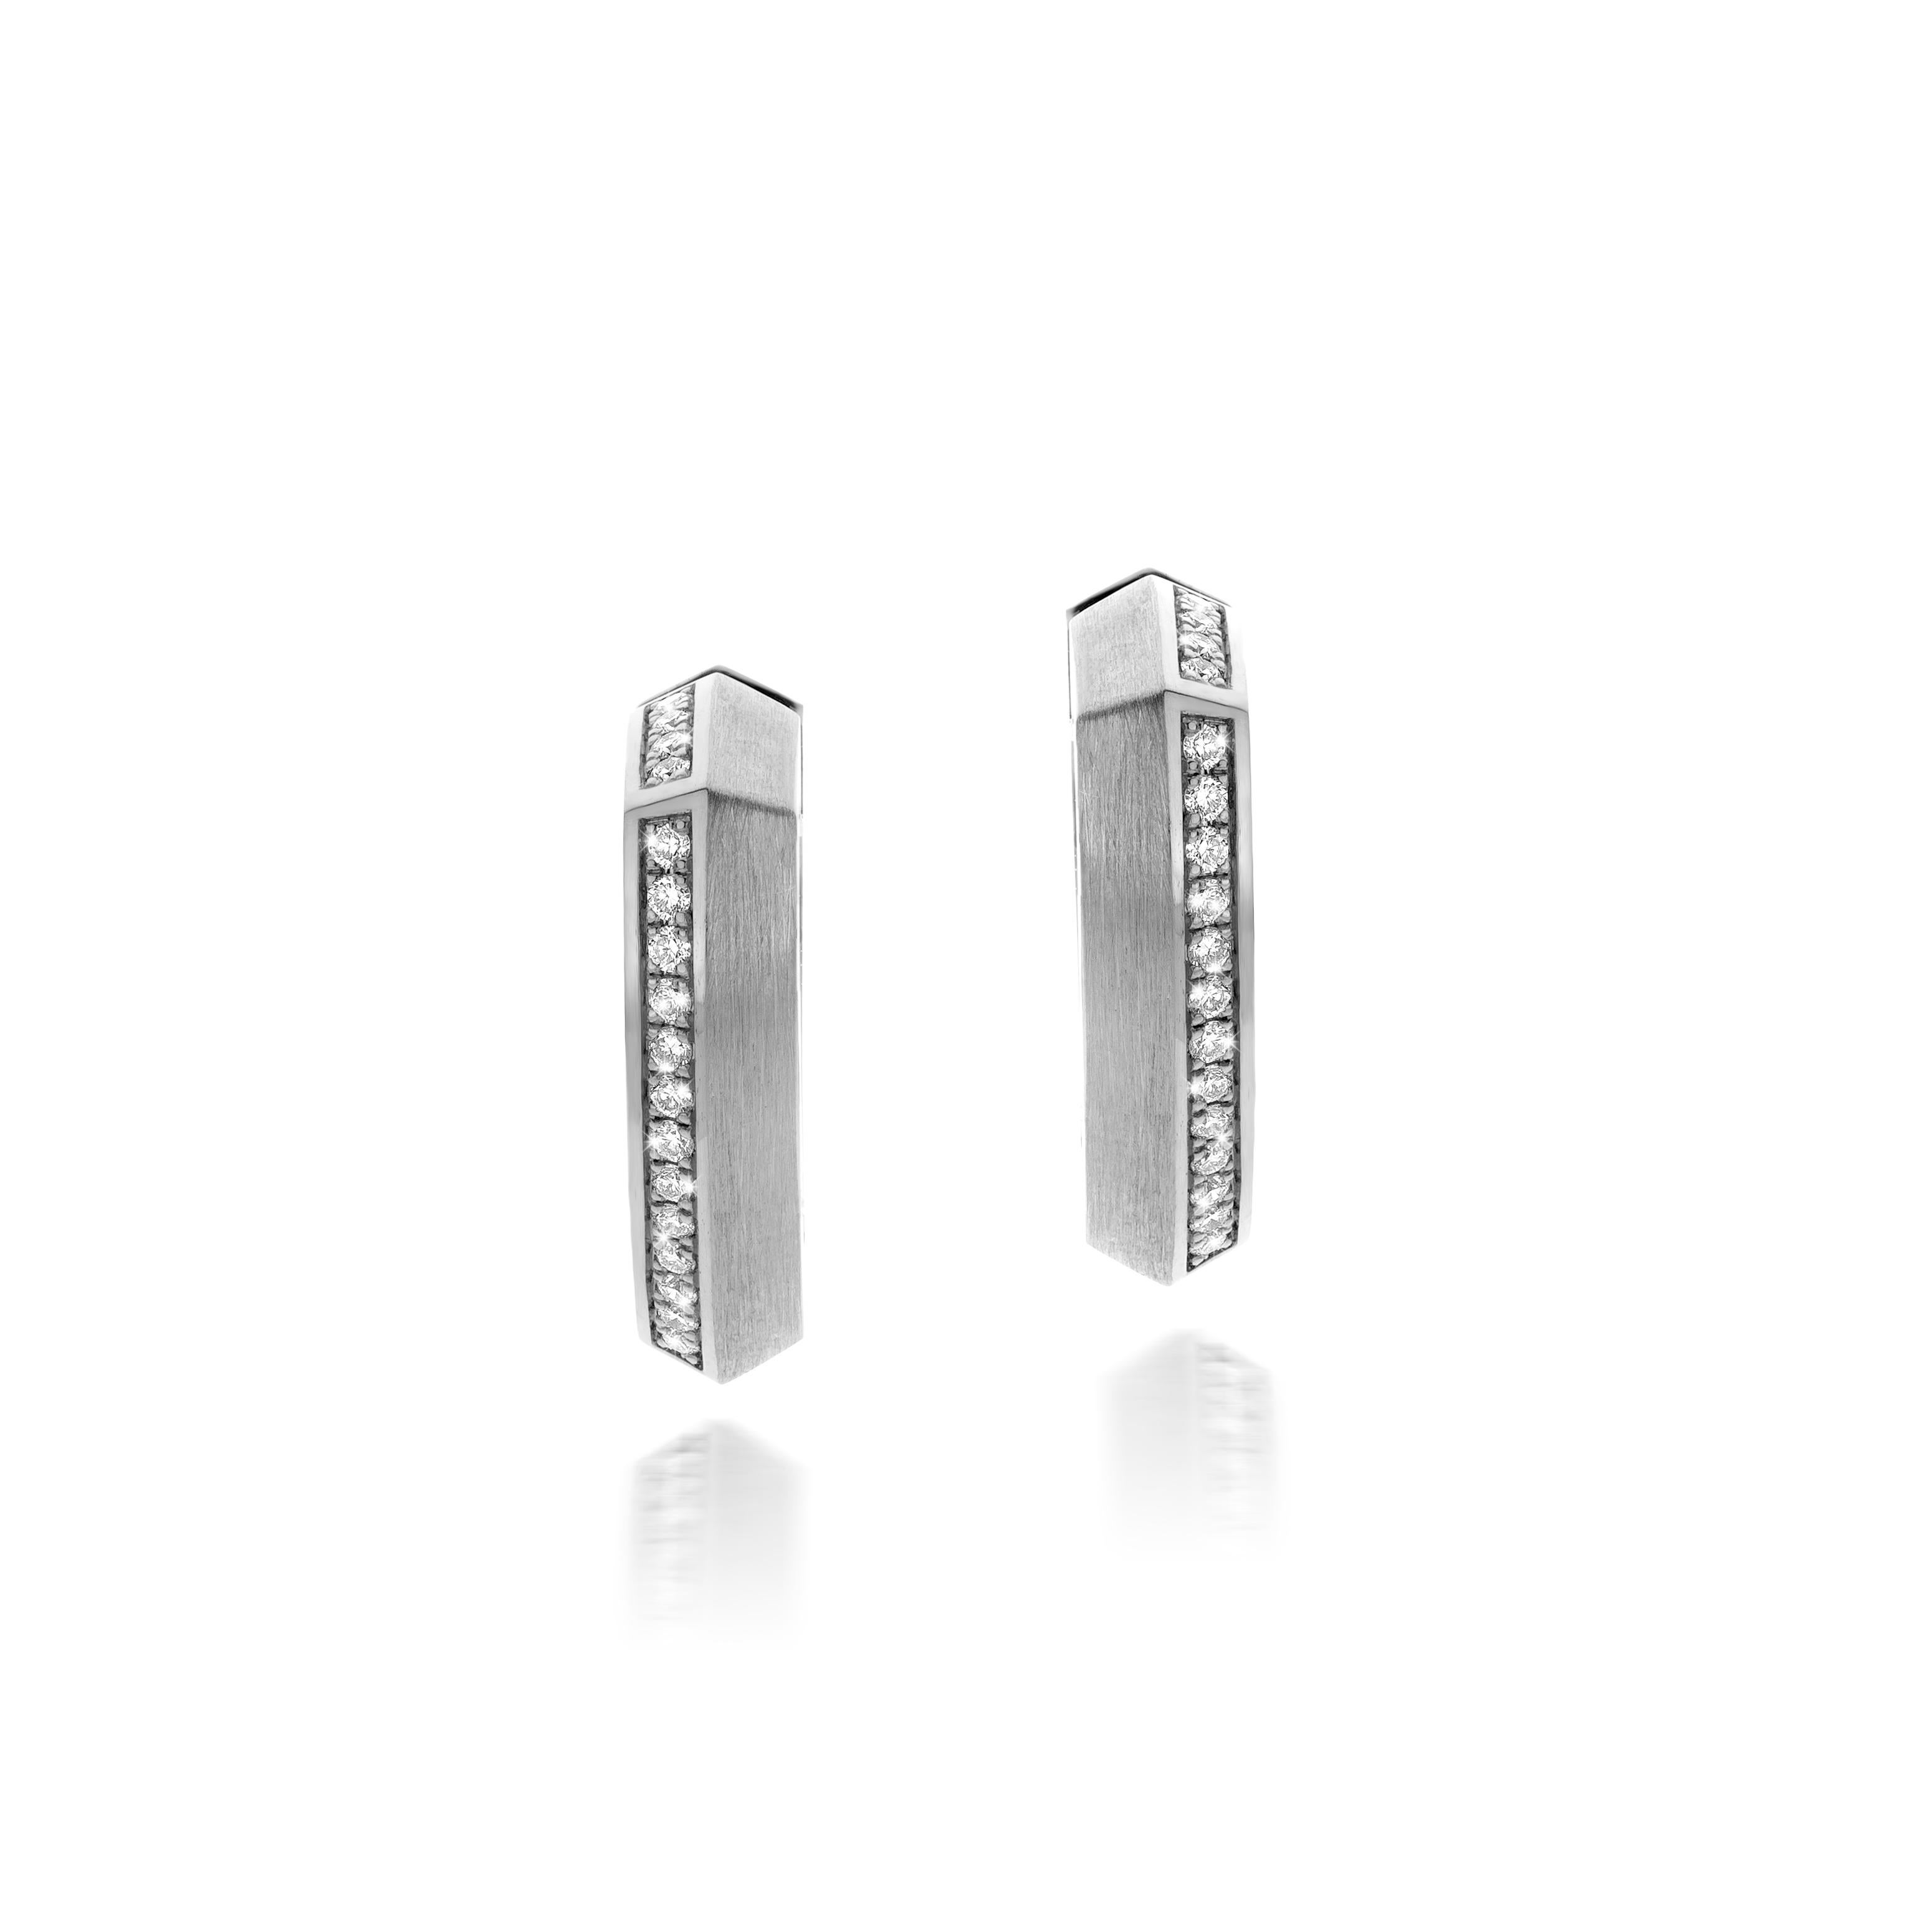 Brilliant Cut Cober with 42 Brilliant-cut Diamonds 0.294 Ct total weight White Gold Earrings For Sale